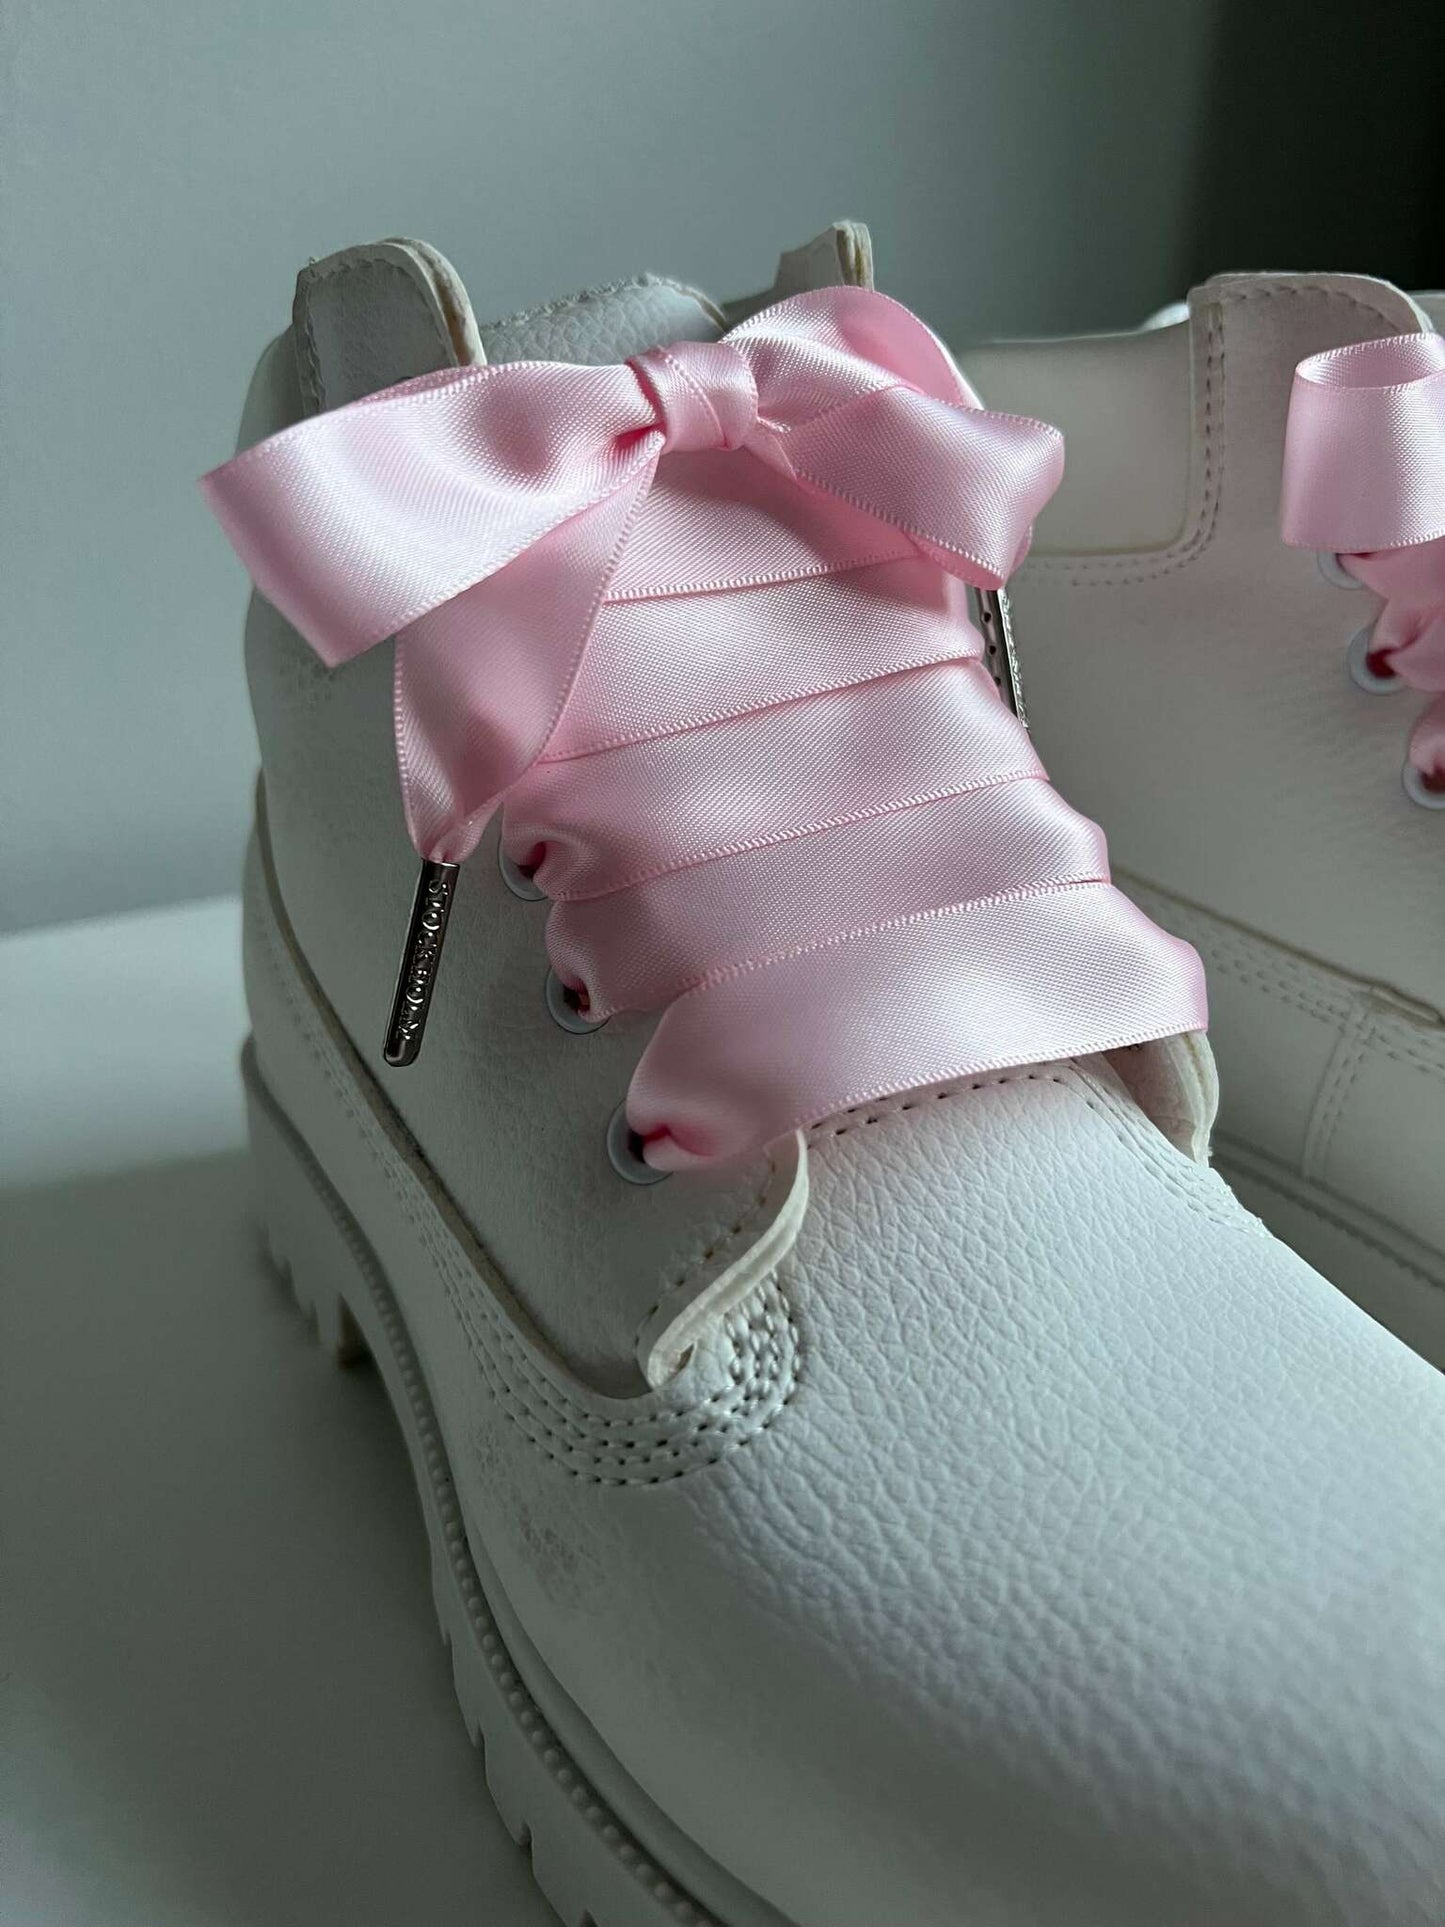 Soft Pink Silk Shoelaces - The Shoelace Brand